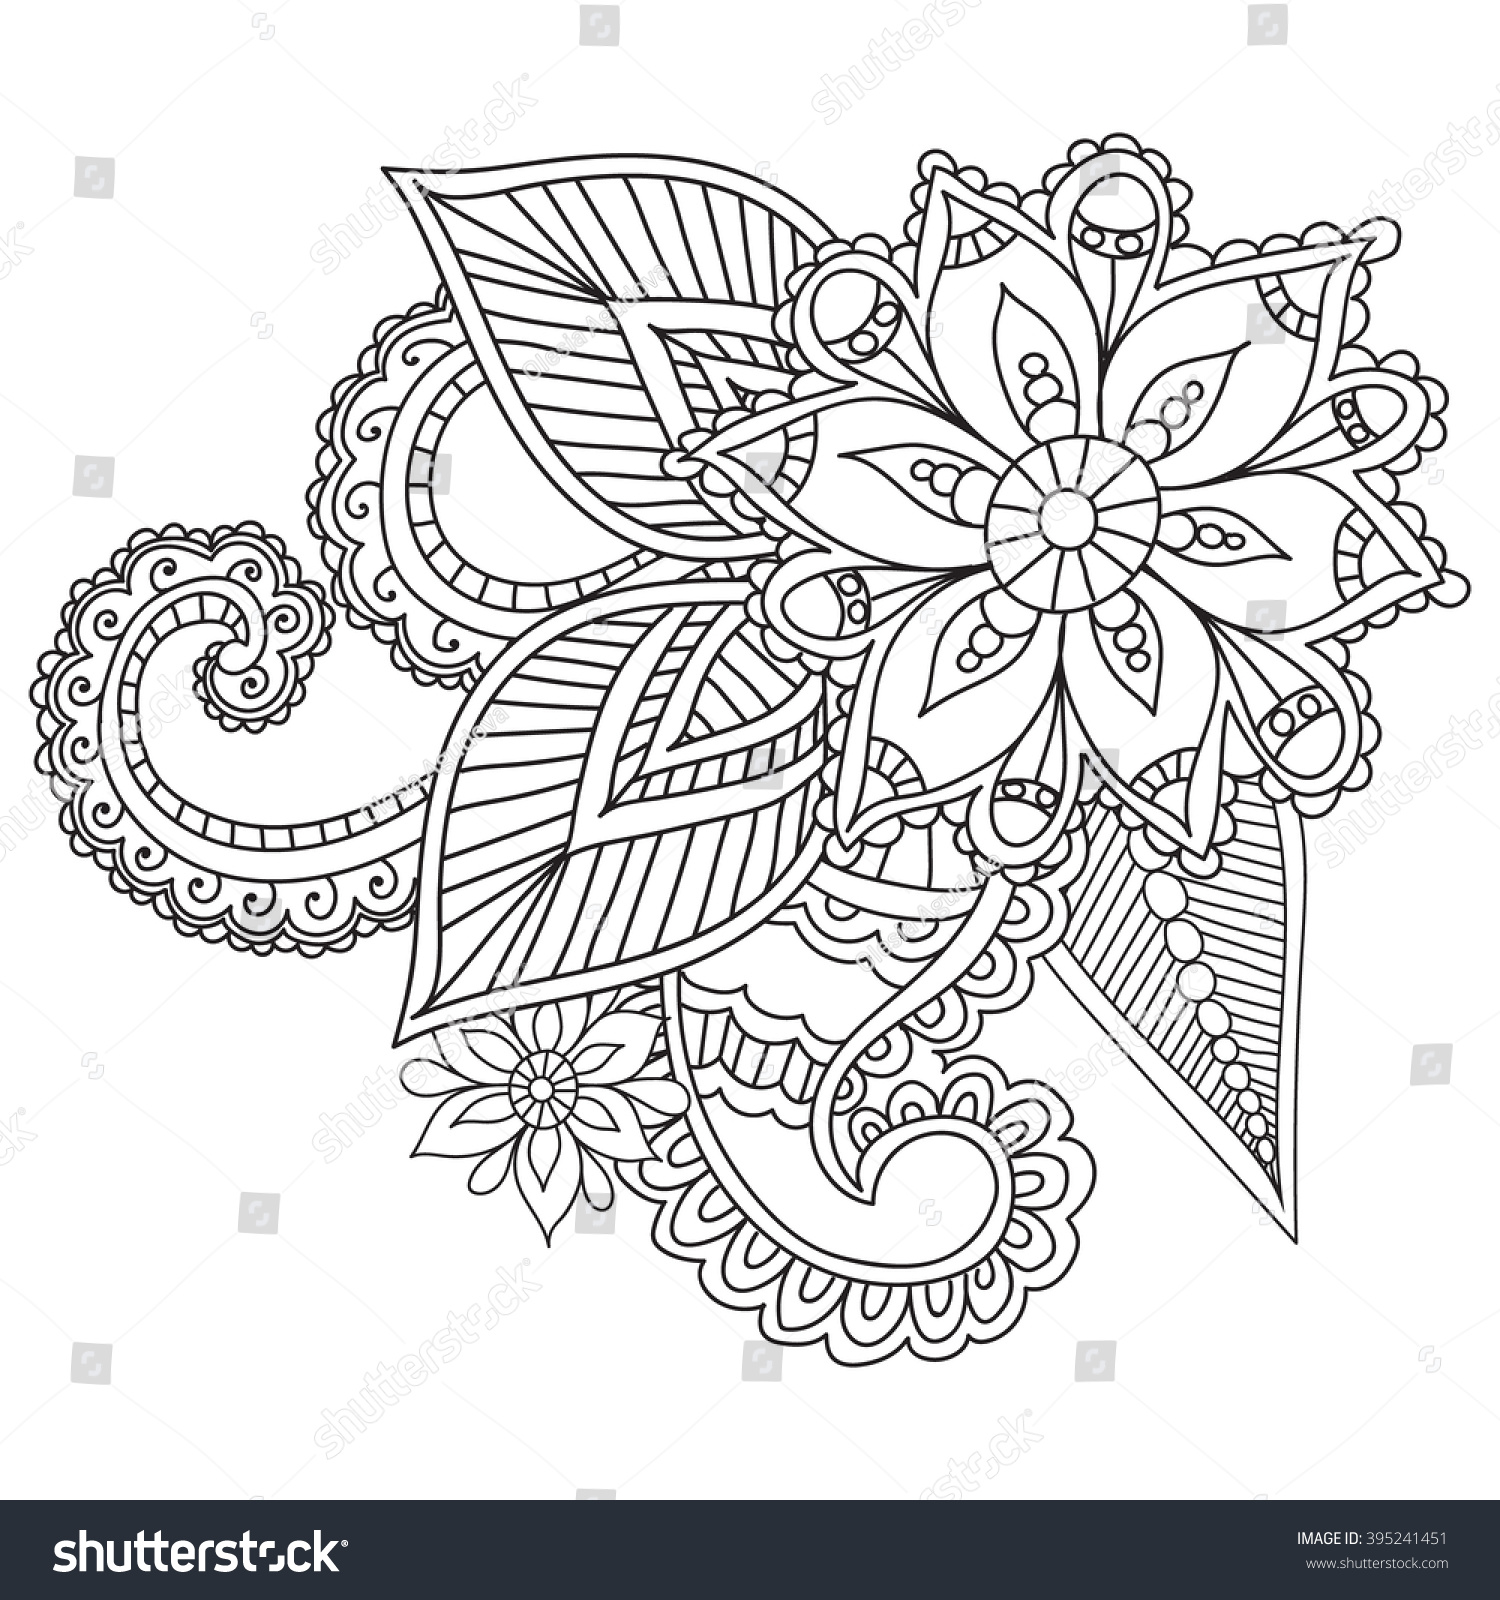  Coloring  Pages  Adults Henna  Mehndi  Doodles Stock Vector 